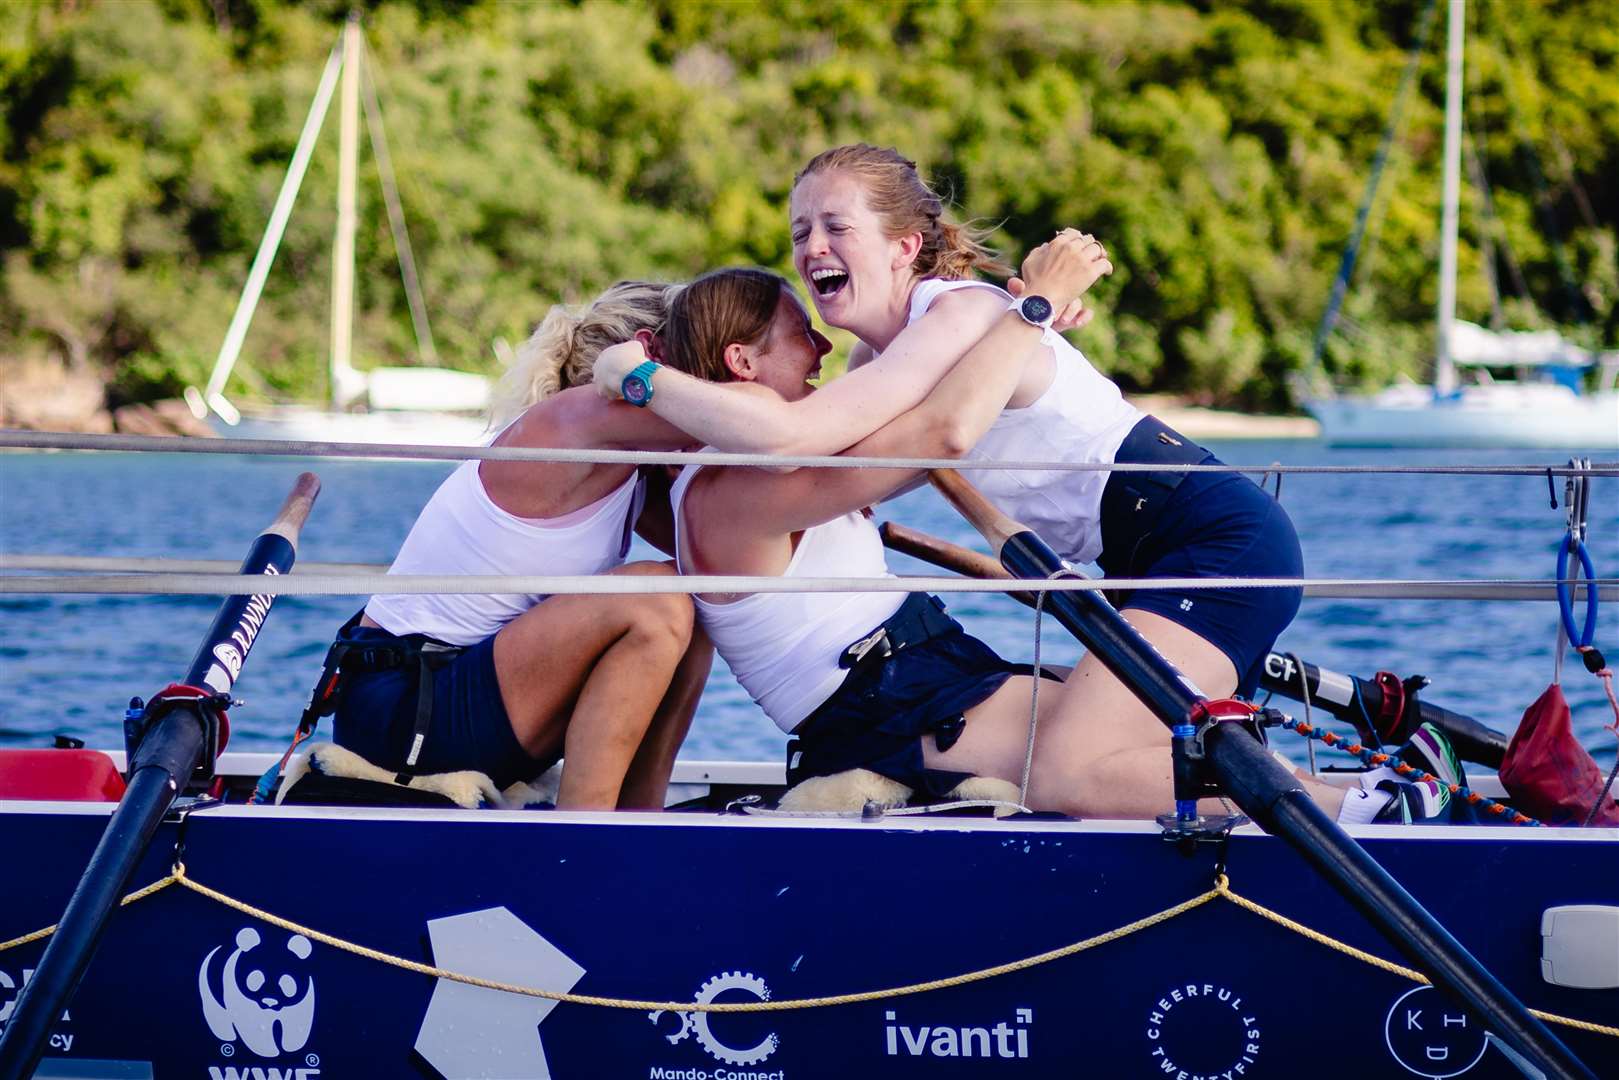 Bobbie Mellor, Hatty Carder and Katherine Antrobus faced tumultuous weather conditions and seasickness to complete the rowing challenge (World’s Toughest Row)